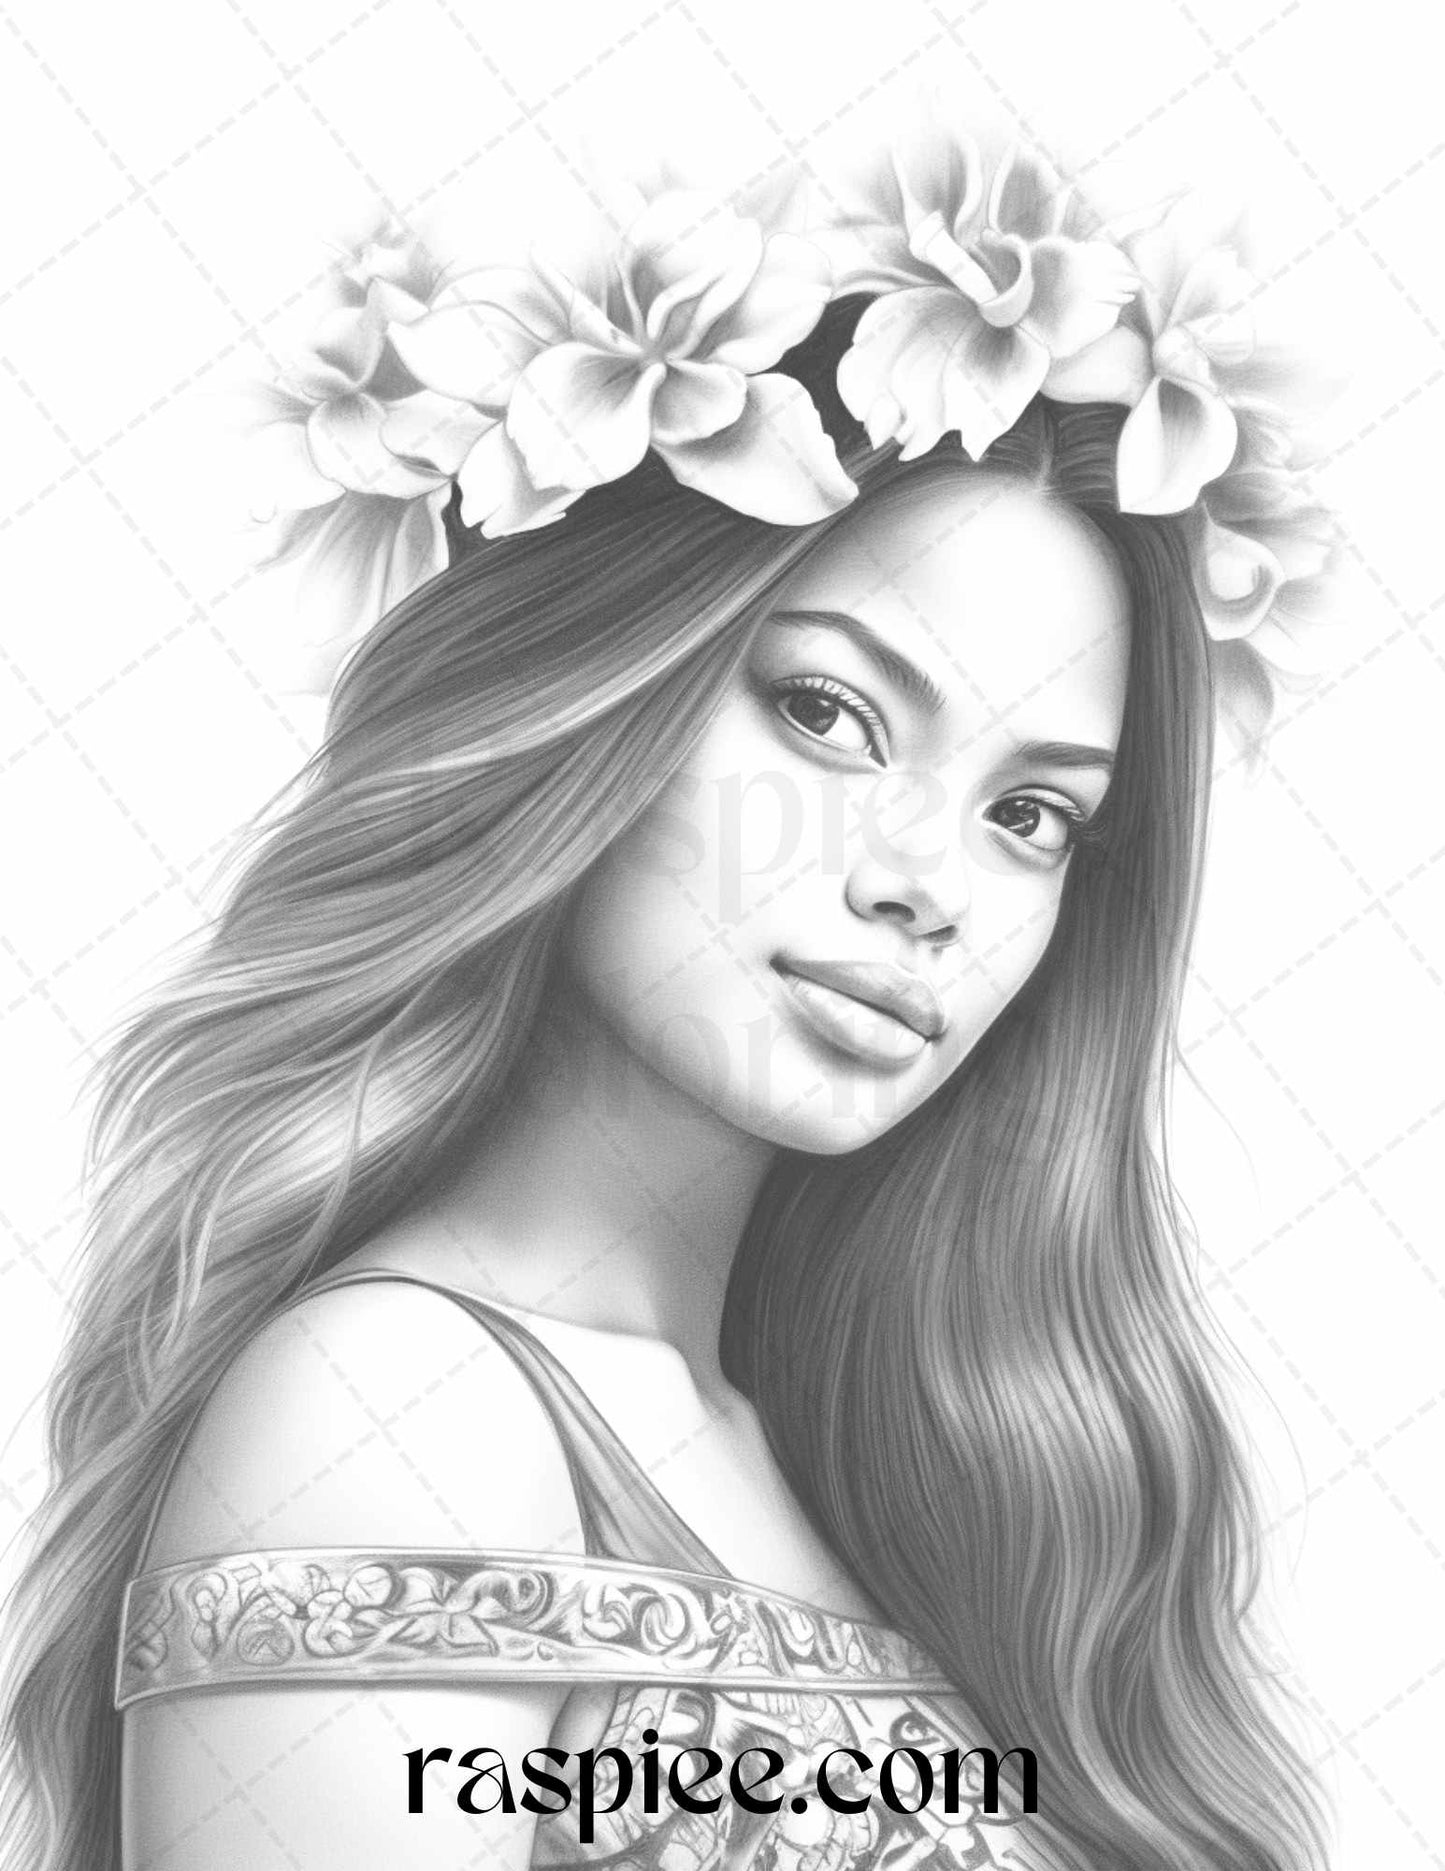 Hawaiian Girls Grayscale Coloring Pages, Hawaiian Girls Illustrations for Coloring, Adult Coloring Pages for Relaxing, Hawaiian Culture Artwork for Coloring, Relaxing Hawaiian Girls Coloring, Summer Coloring Pages for Adults